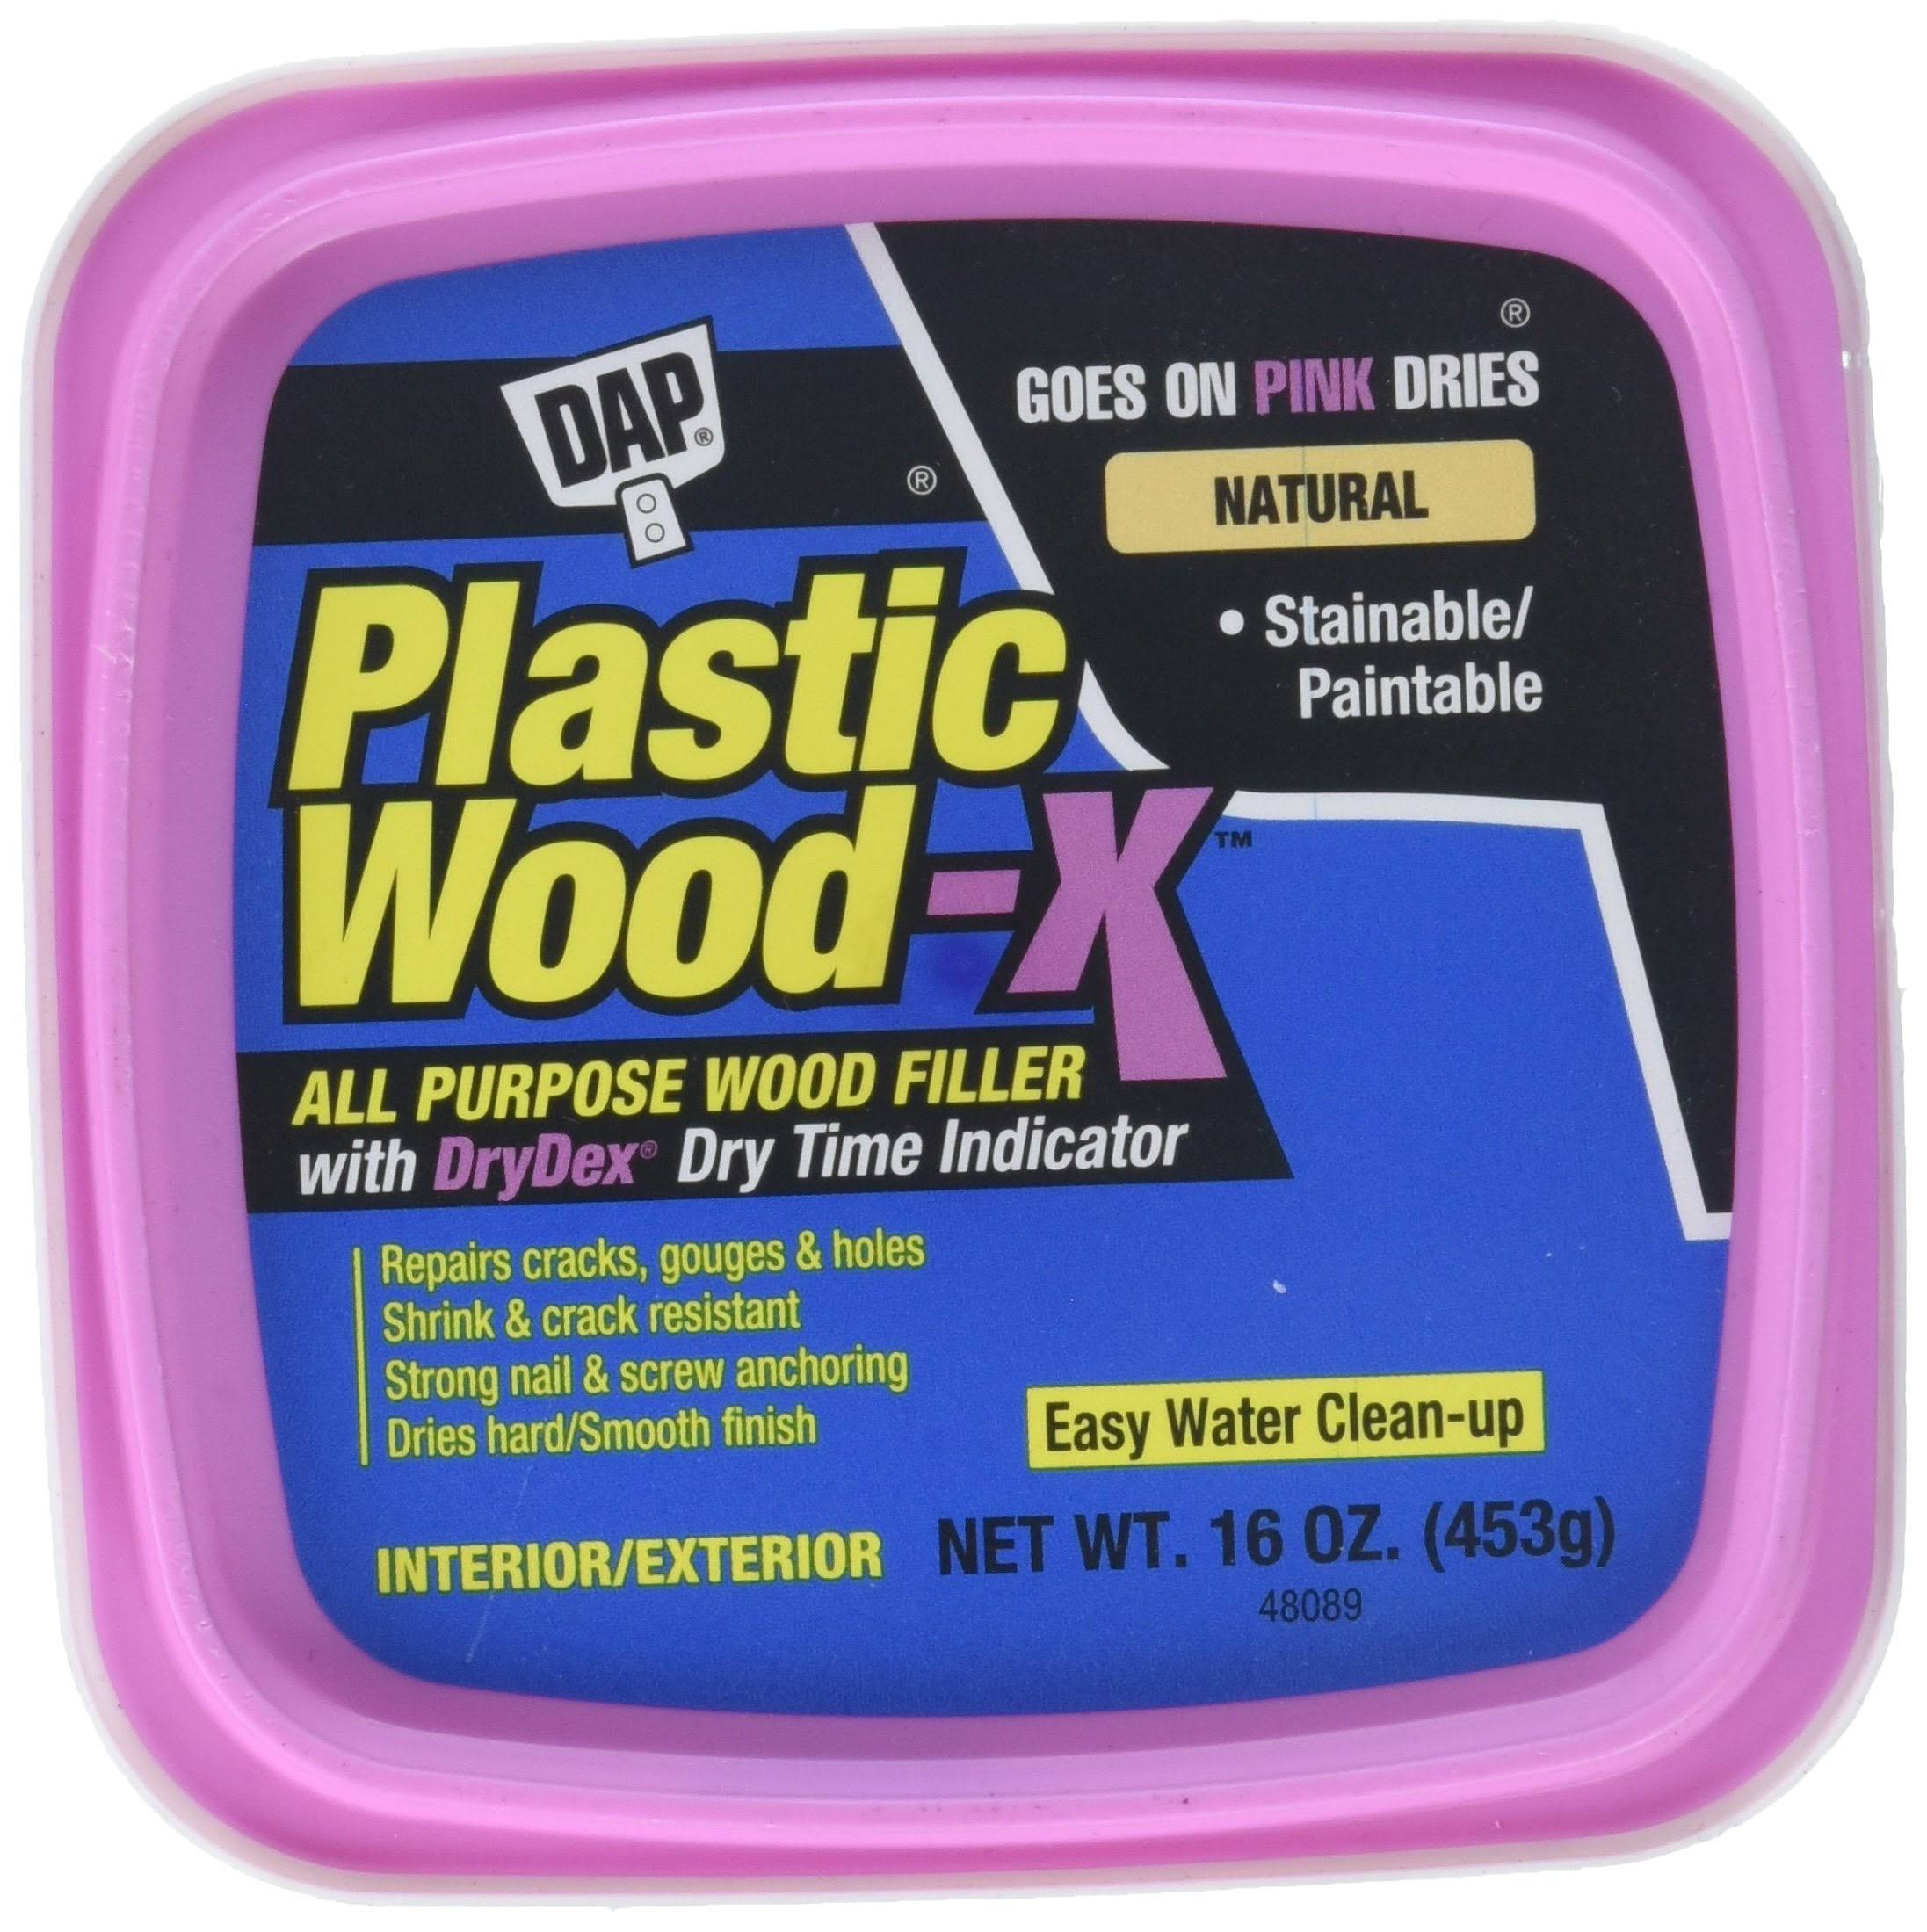 Dap 00542 Plastic Wood-x Stainable Wood Filler - Natural, 16oz